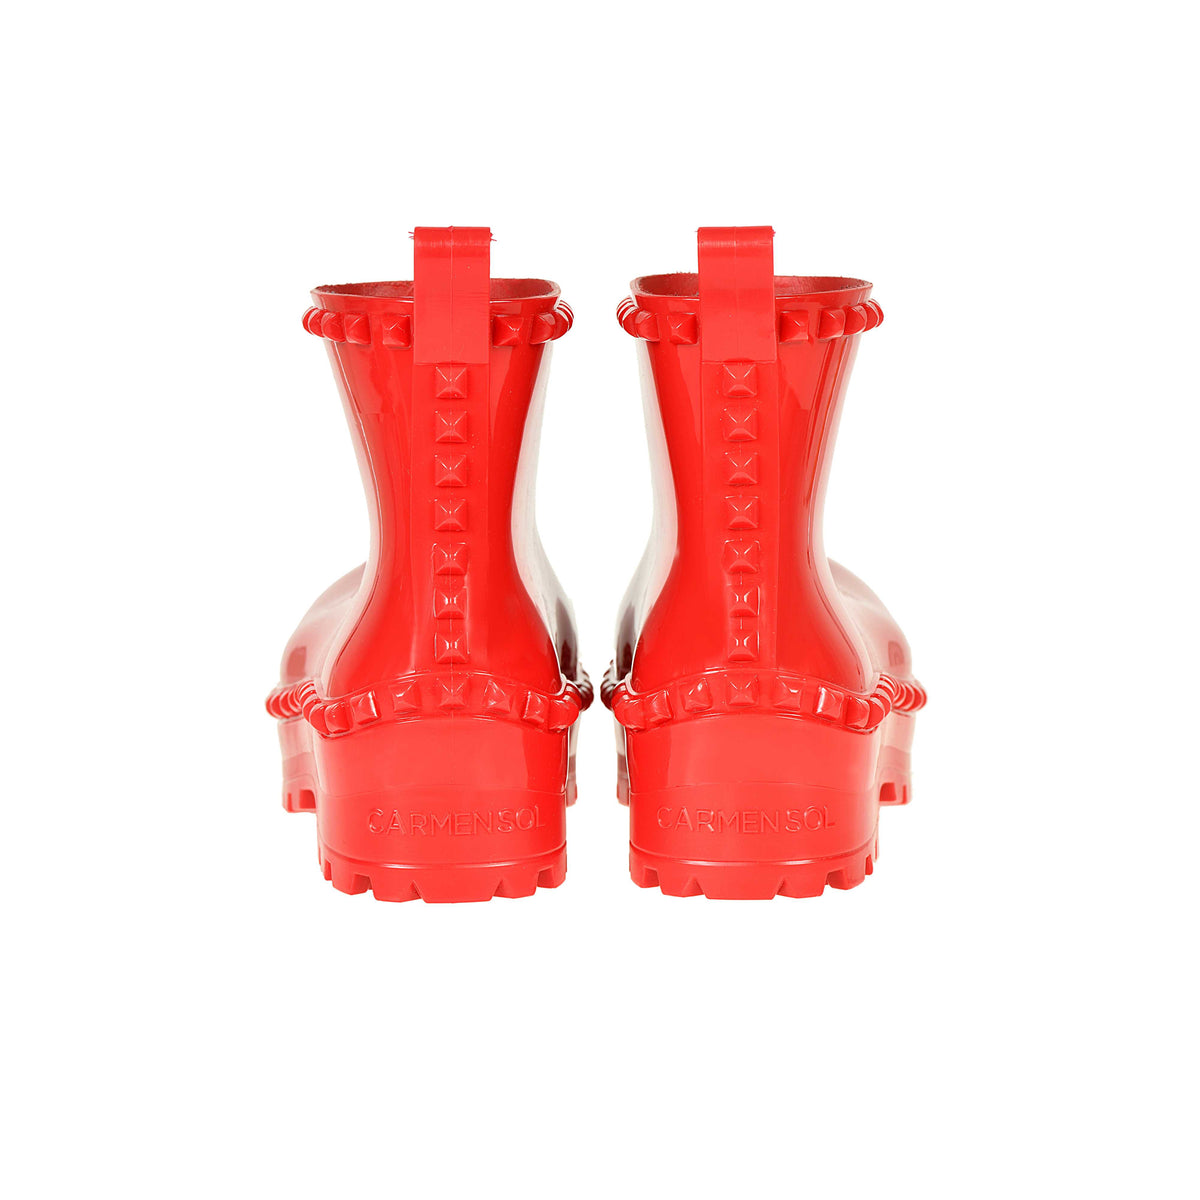 Pair of red Carmen Sol Bottega puddle boots in the back view